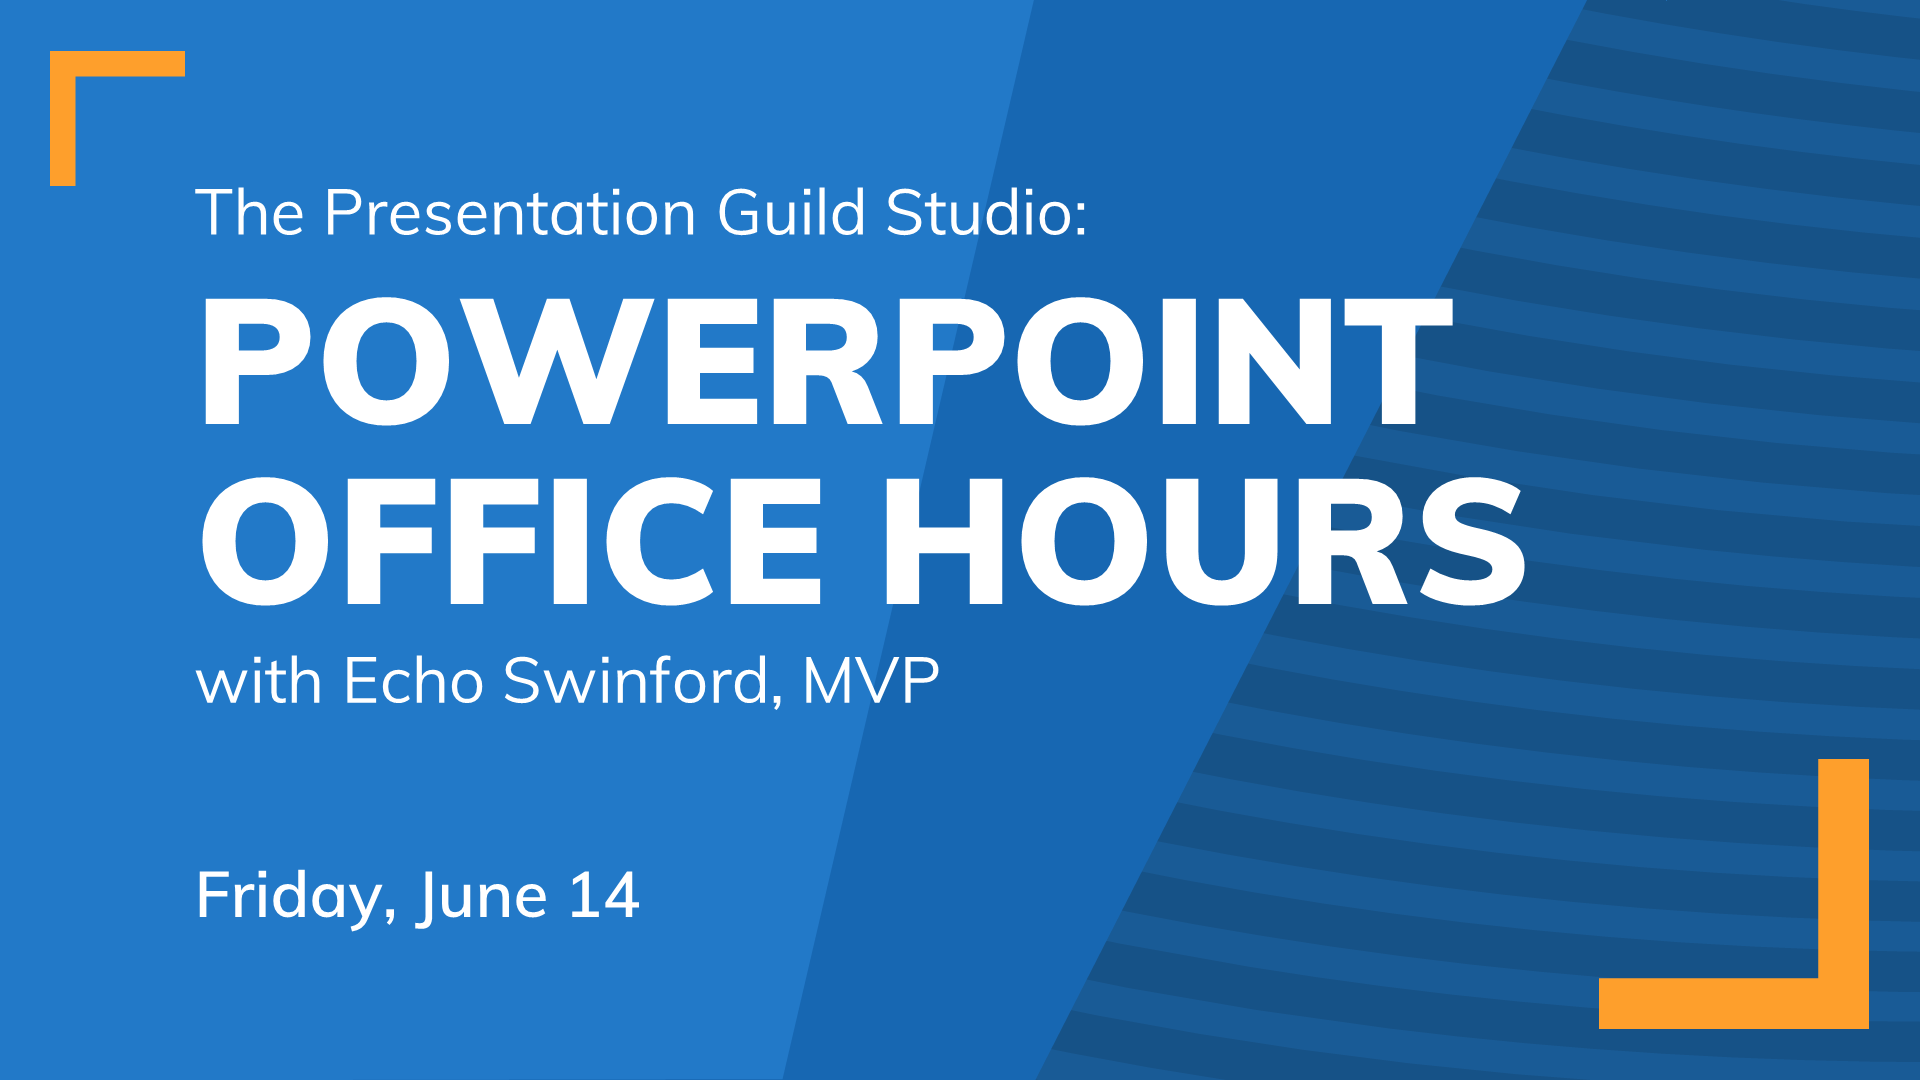 PowerPoint Office Hours: Friday, June 14